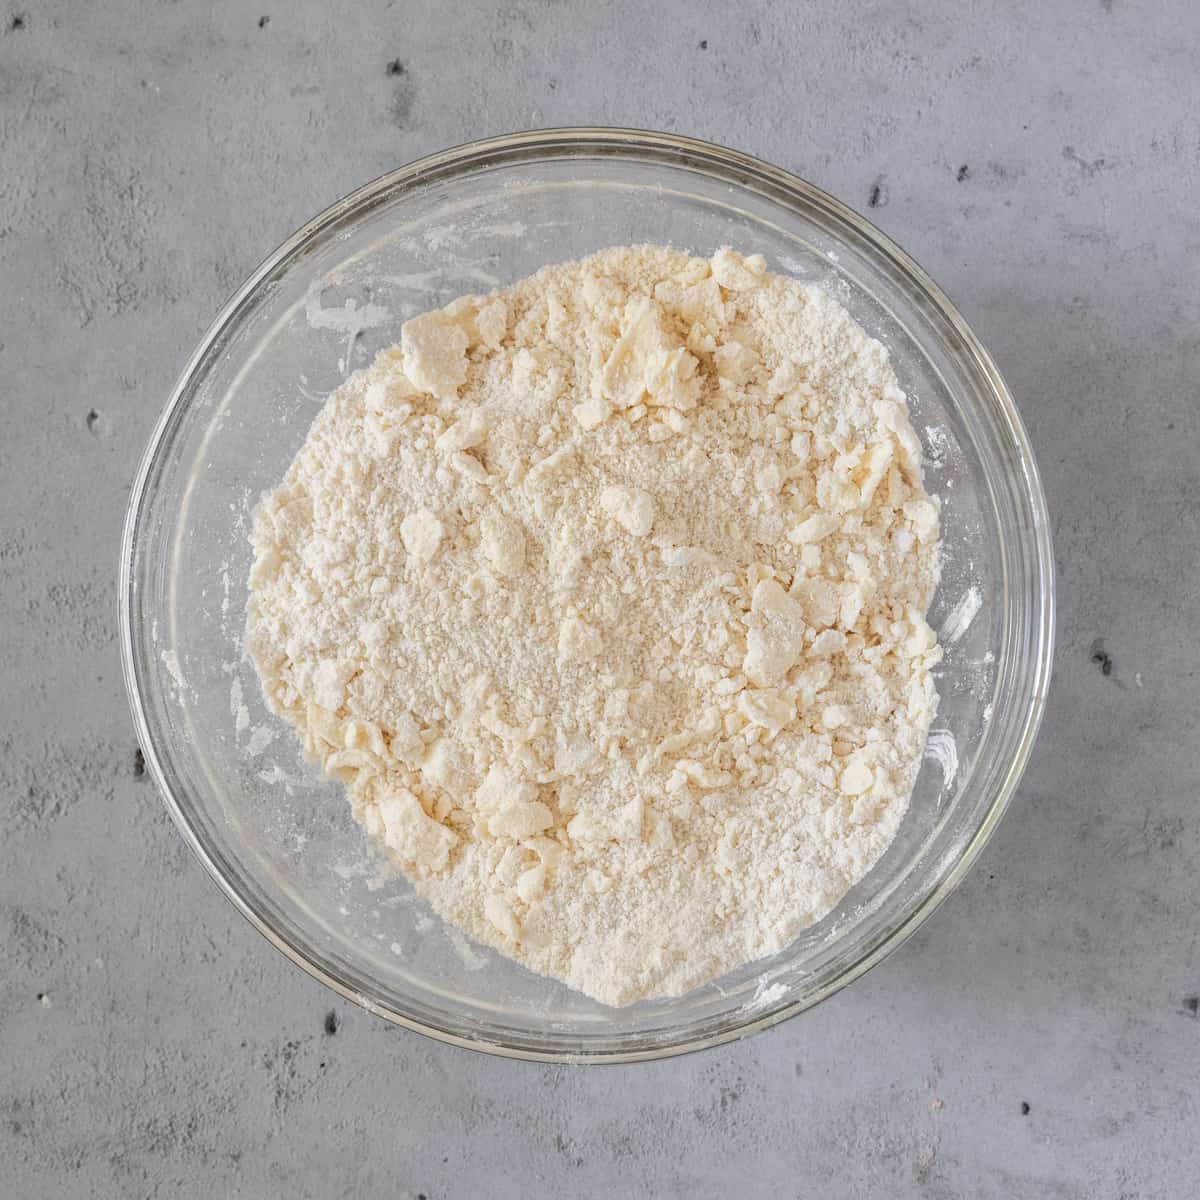 the dry ingredients and butter combined in a glass bowl on a grey background.